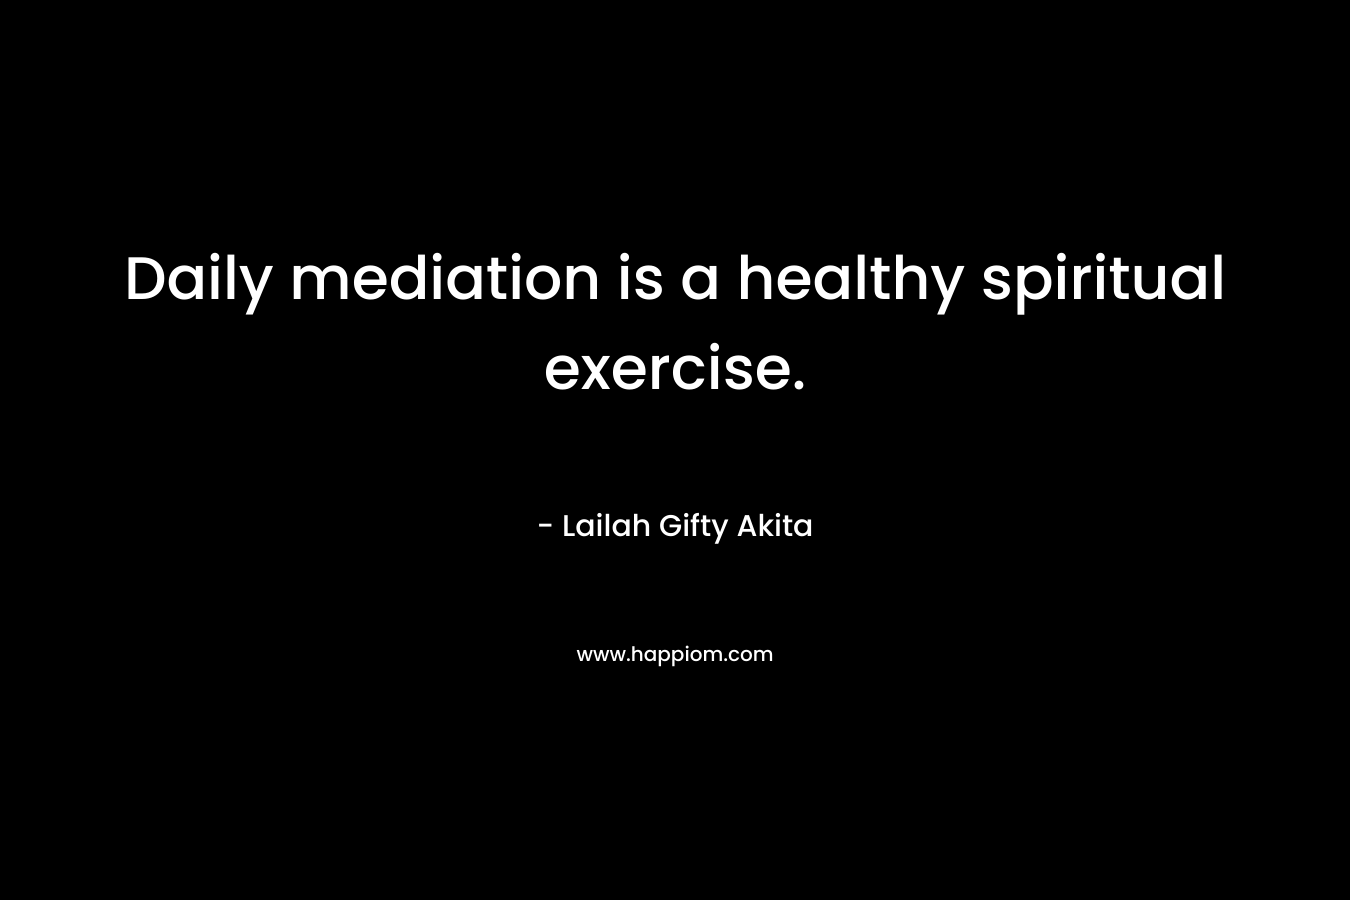 Daily mediation is a healthy spiritual exercise.